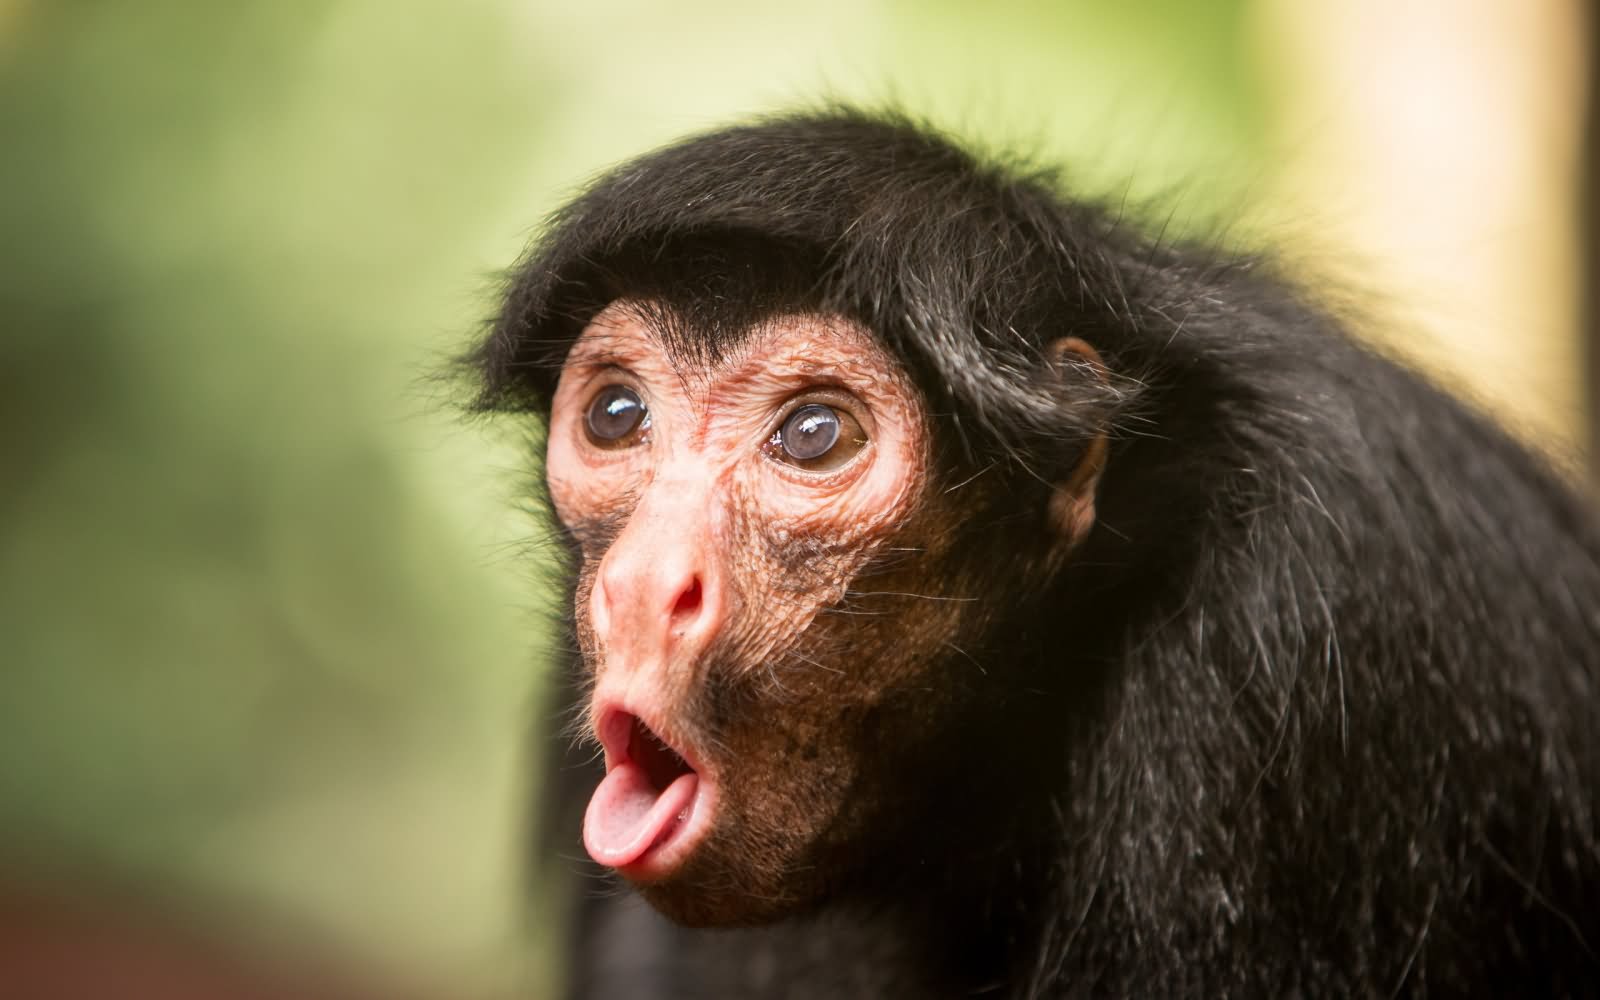 22 Funniest Monkey Face Pictures That Will Make You Laugh